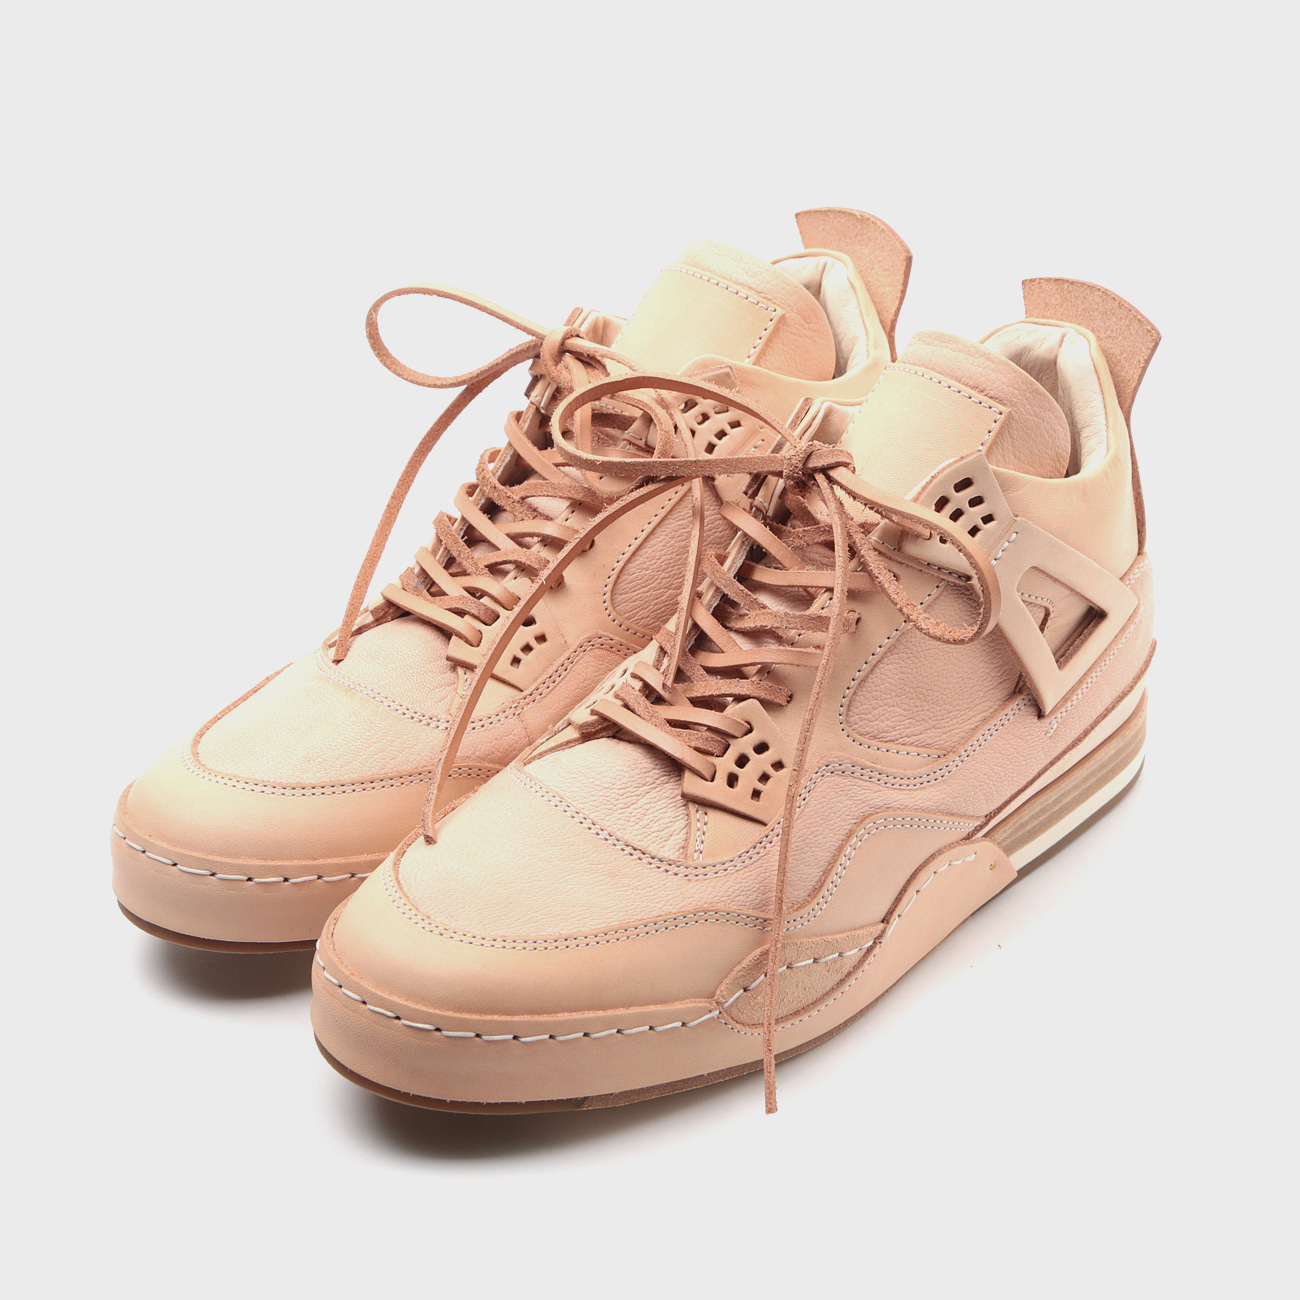 Hender Scheme / エンダースキーマ | manual industrial products 10